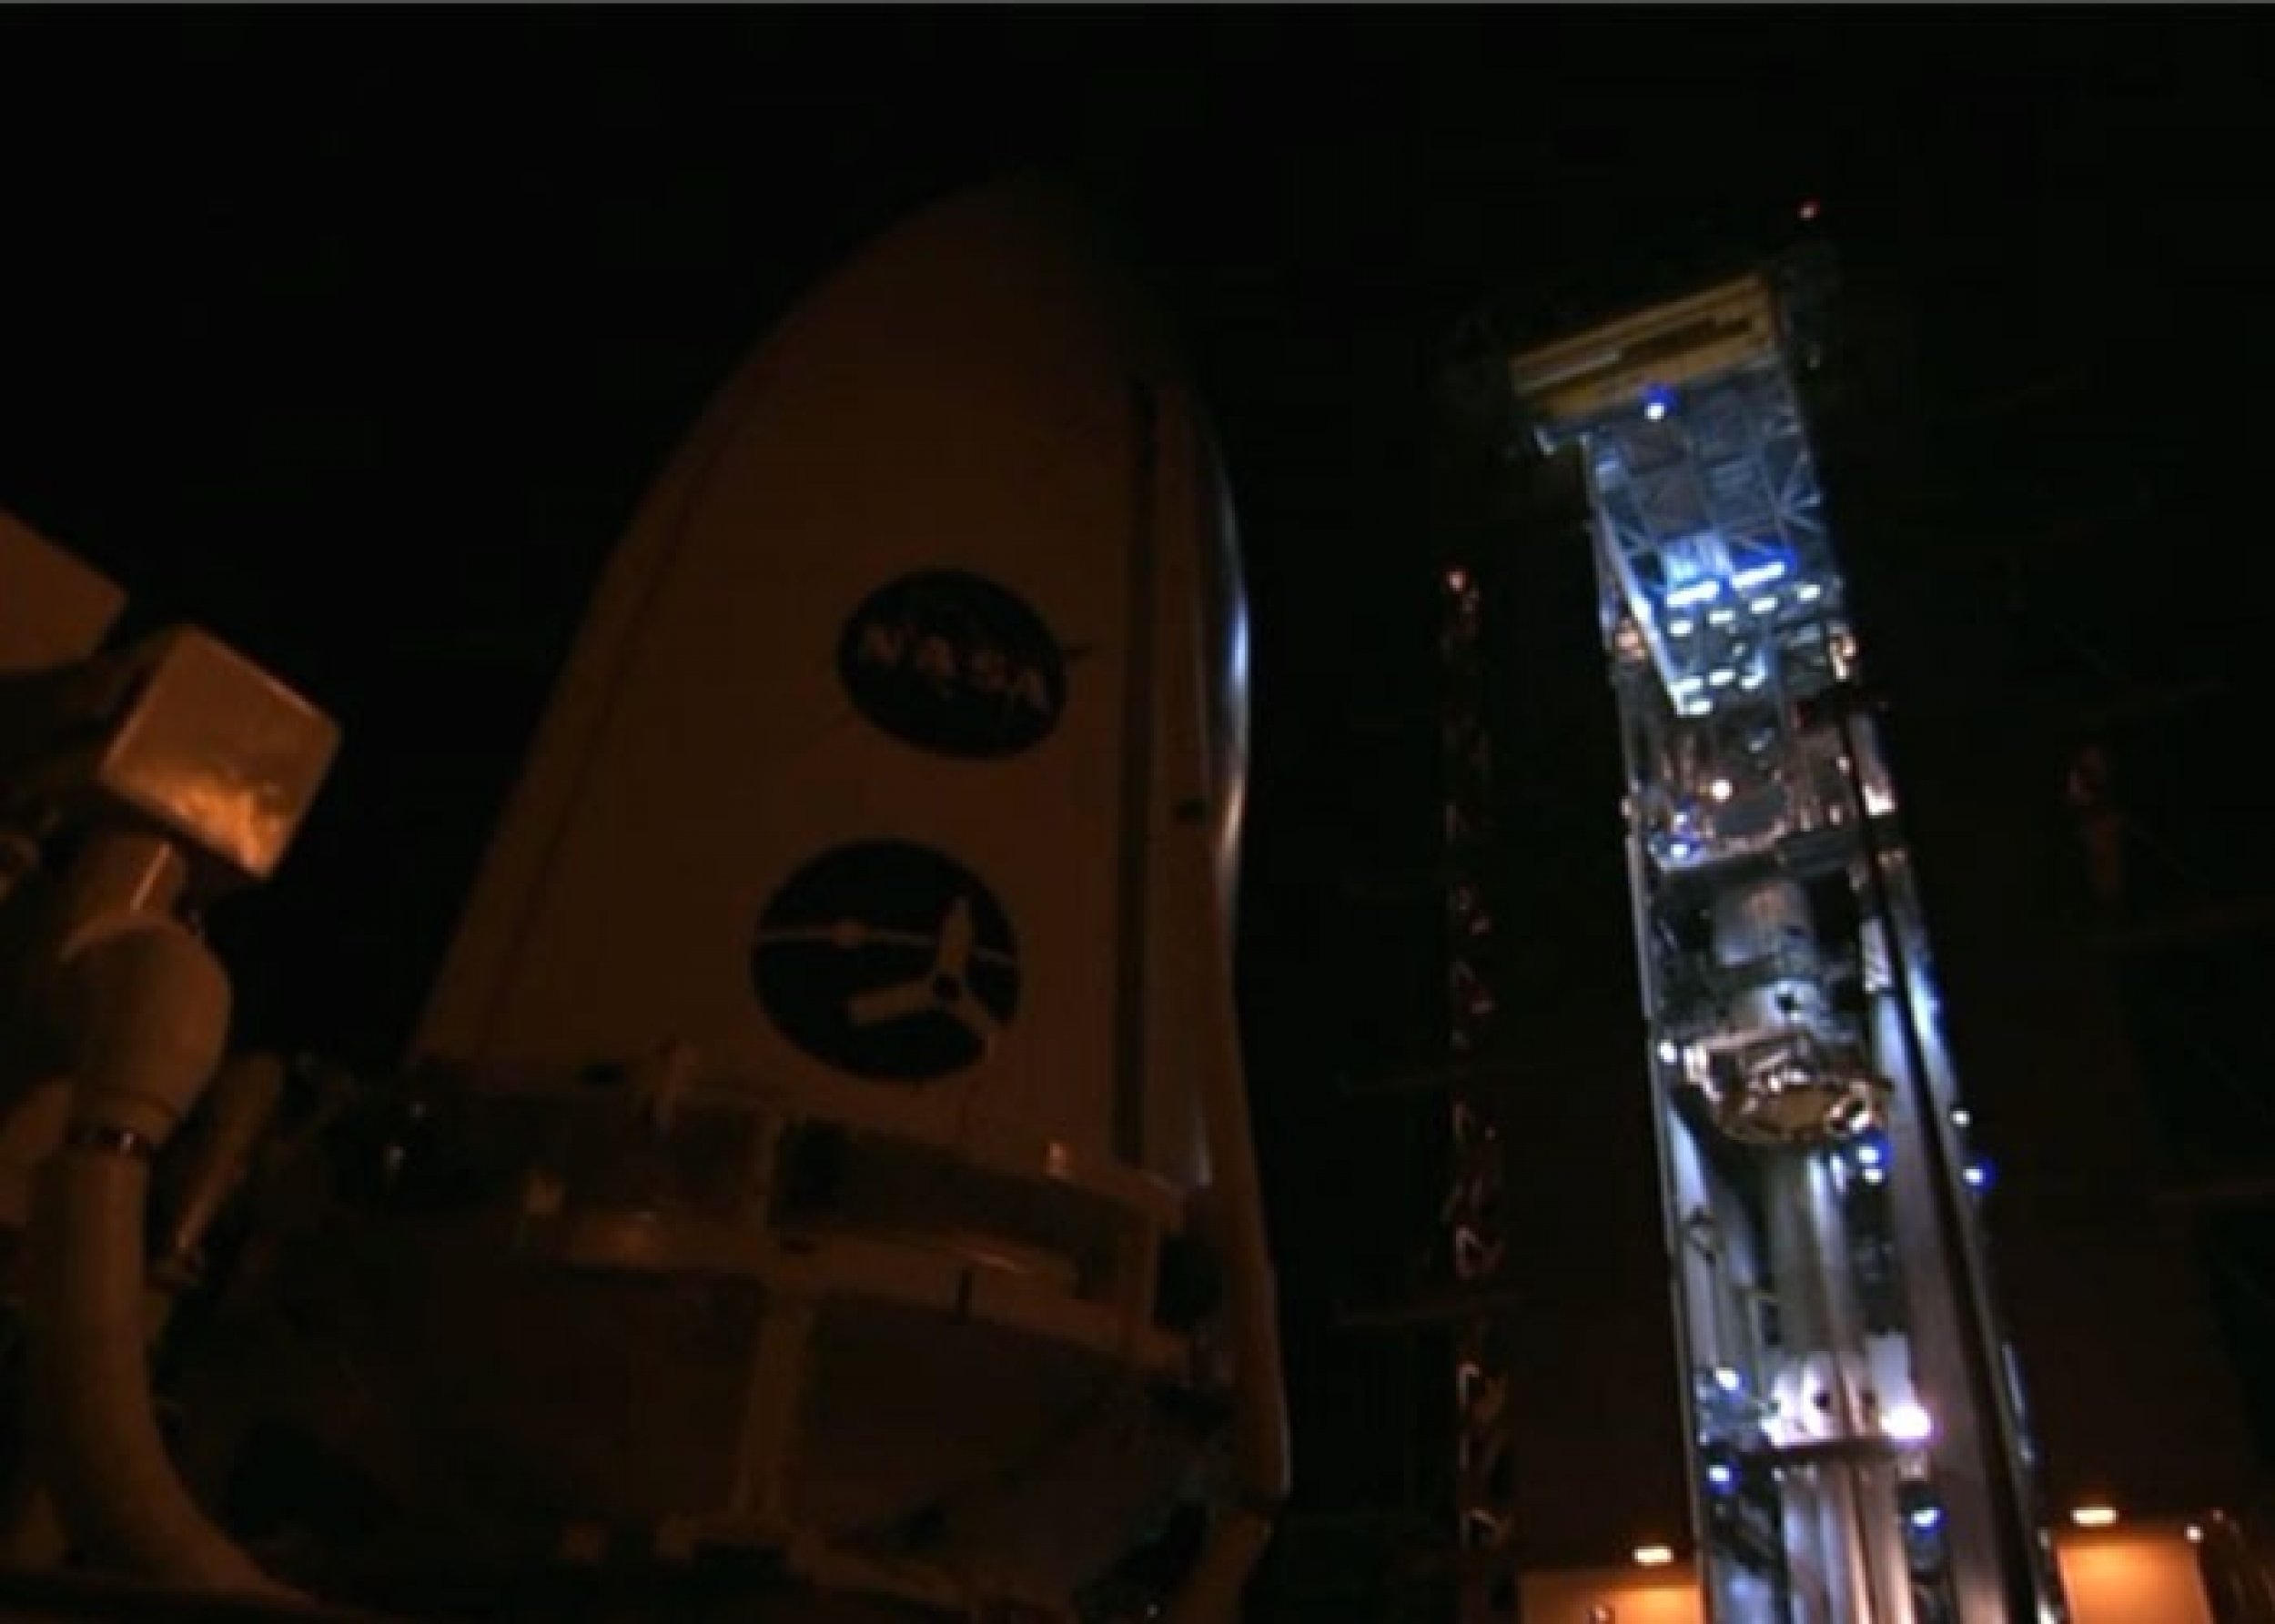 Jupiter probe Juno, which rests inside a part of Atlas V rocket, is being carried to the launch pad